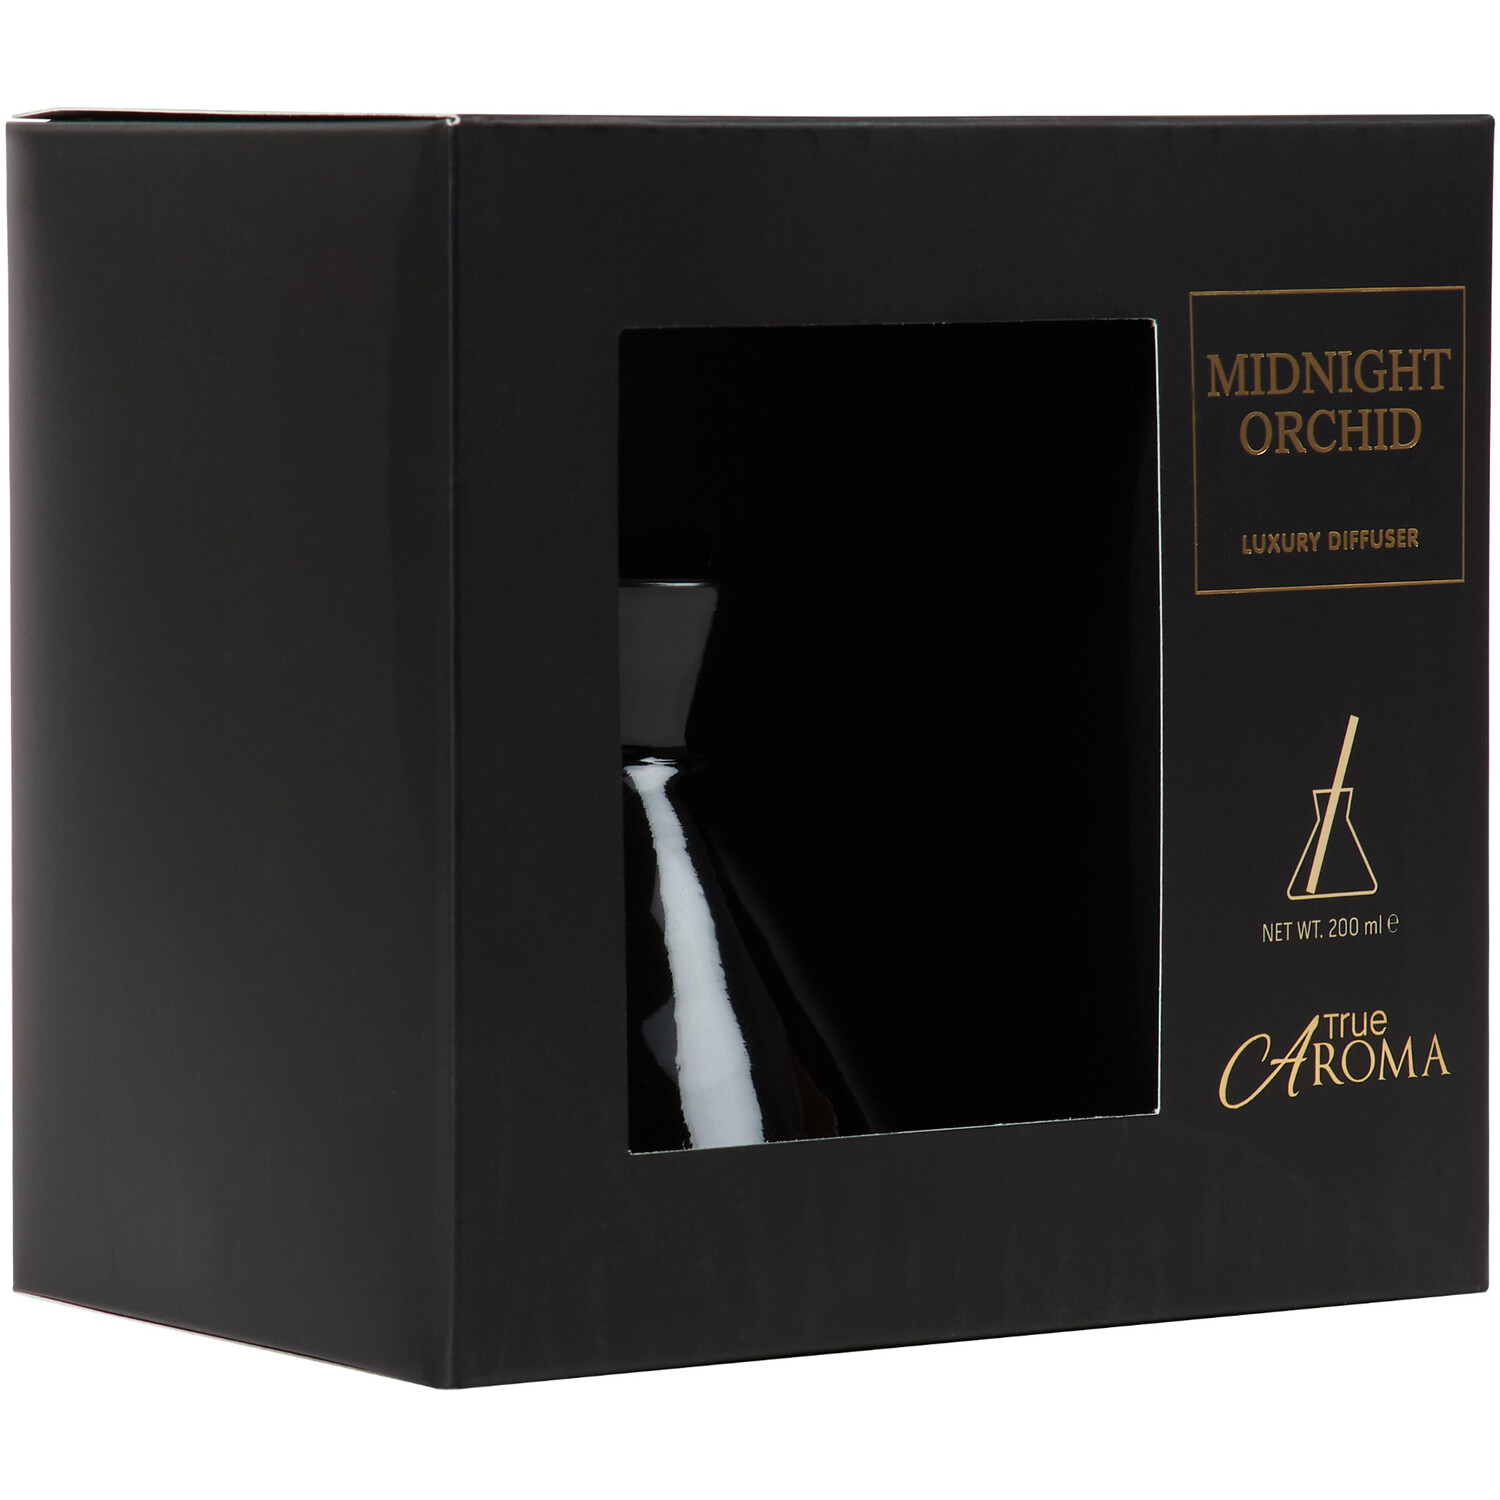 Midnight Orchid Diffuser - Black Image 3